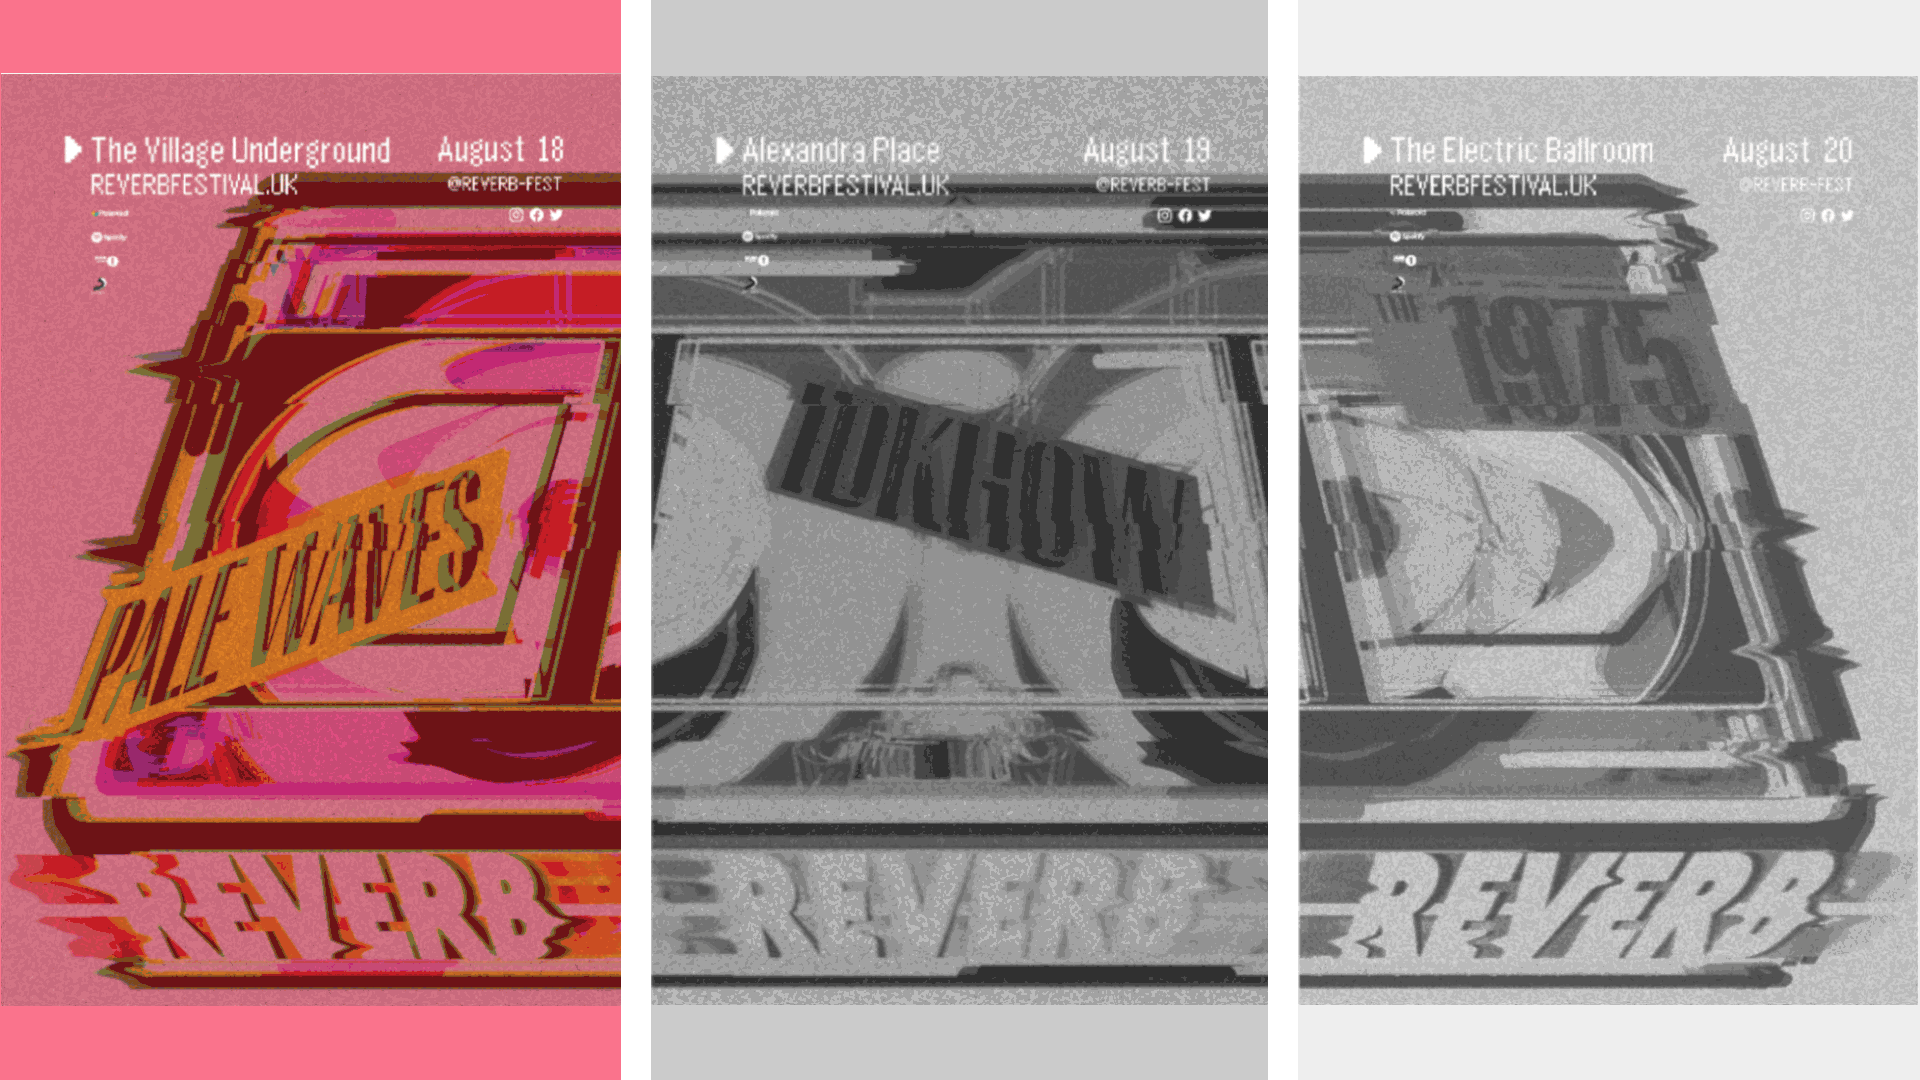 A series of three posters which when viewed together form the image of a transparent cassette tape. Poster one is mainly red, poster two is mainly orange, and poster three is mainly yellow. The text of the poster mimics old VHS text layout. The cassette image is illustrated to have a glitching effect and has the bands’ names as “stickers” on the VHS. The title of the festival “Reverb” is placed on the bottom with a white line through it that suggests the image of a wavelength, the overall effect is that of glitching as the name and moves to the left and right in orange, red, and yellow.